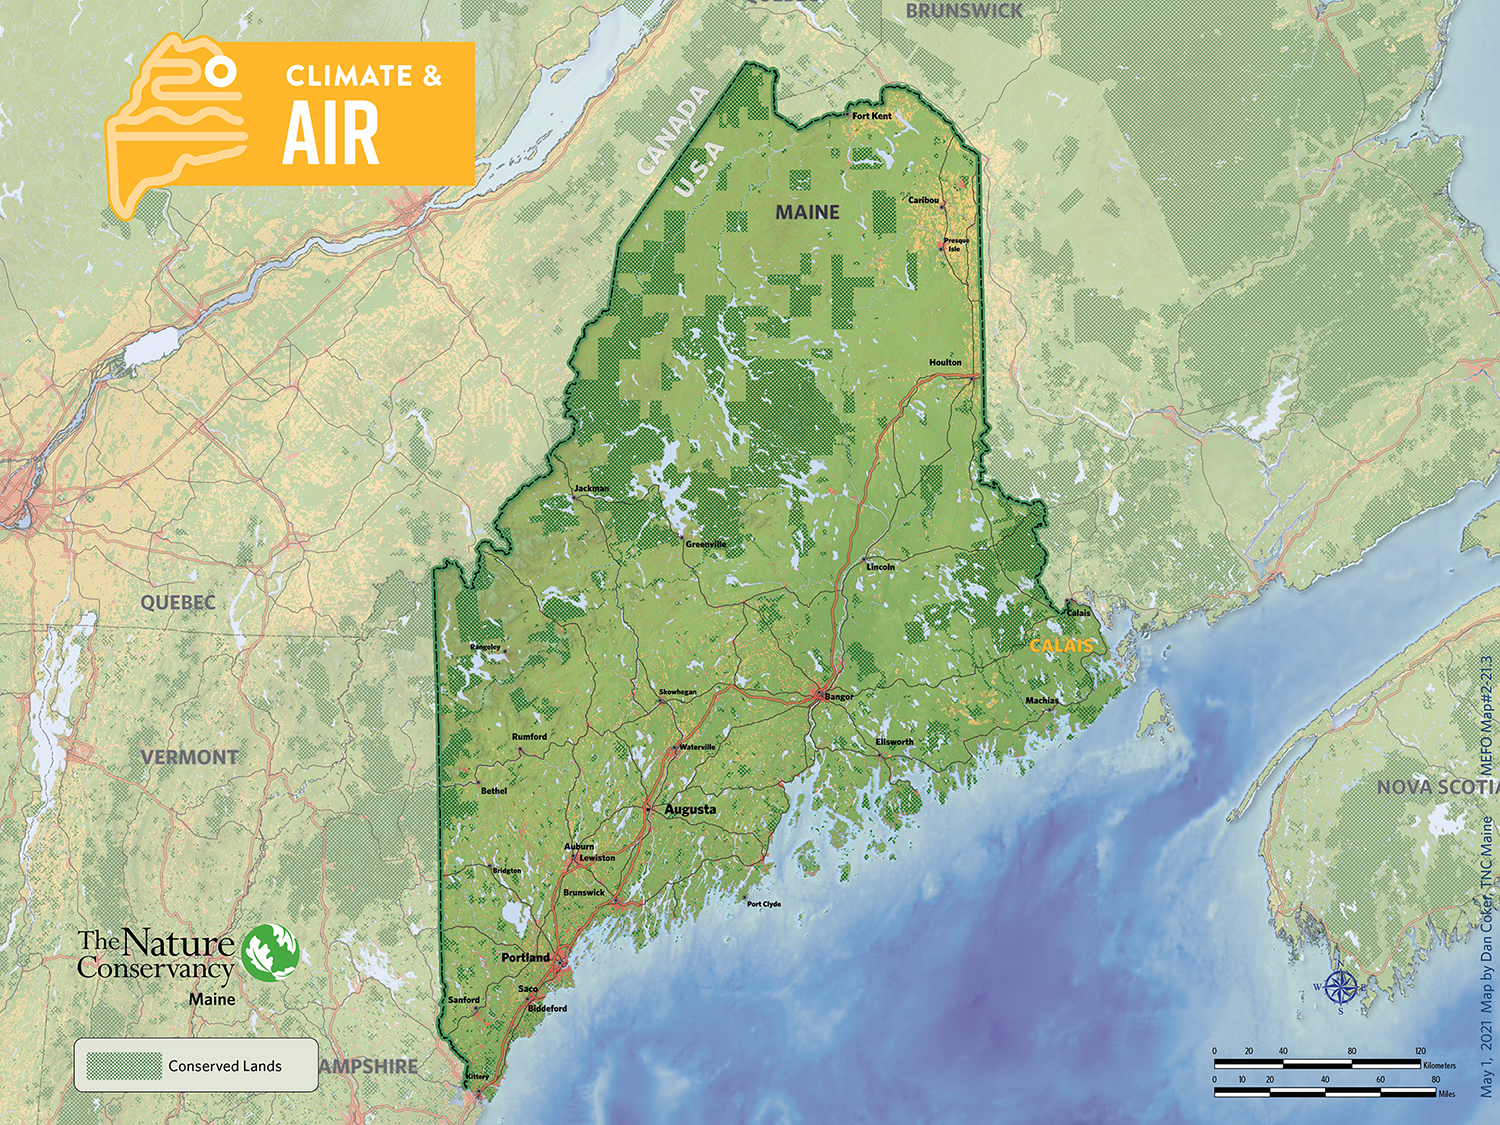 A Map of Maine and surrounding areas.